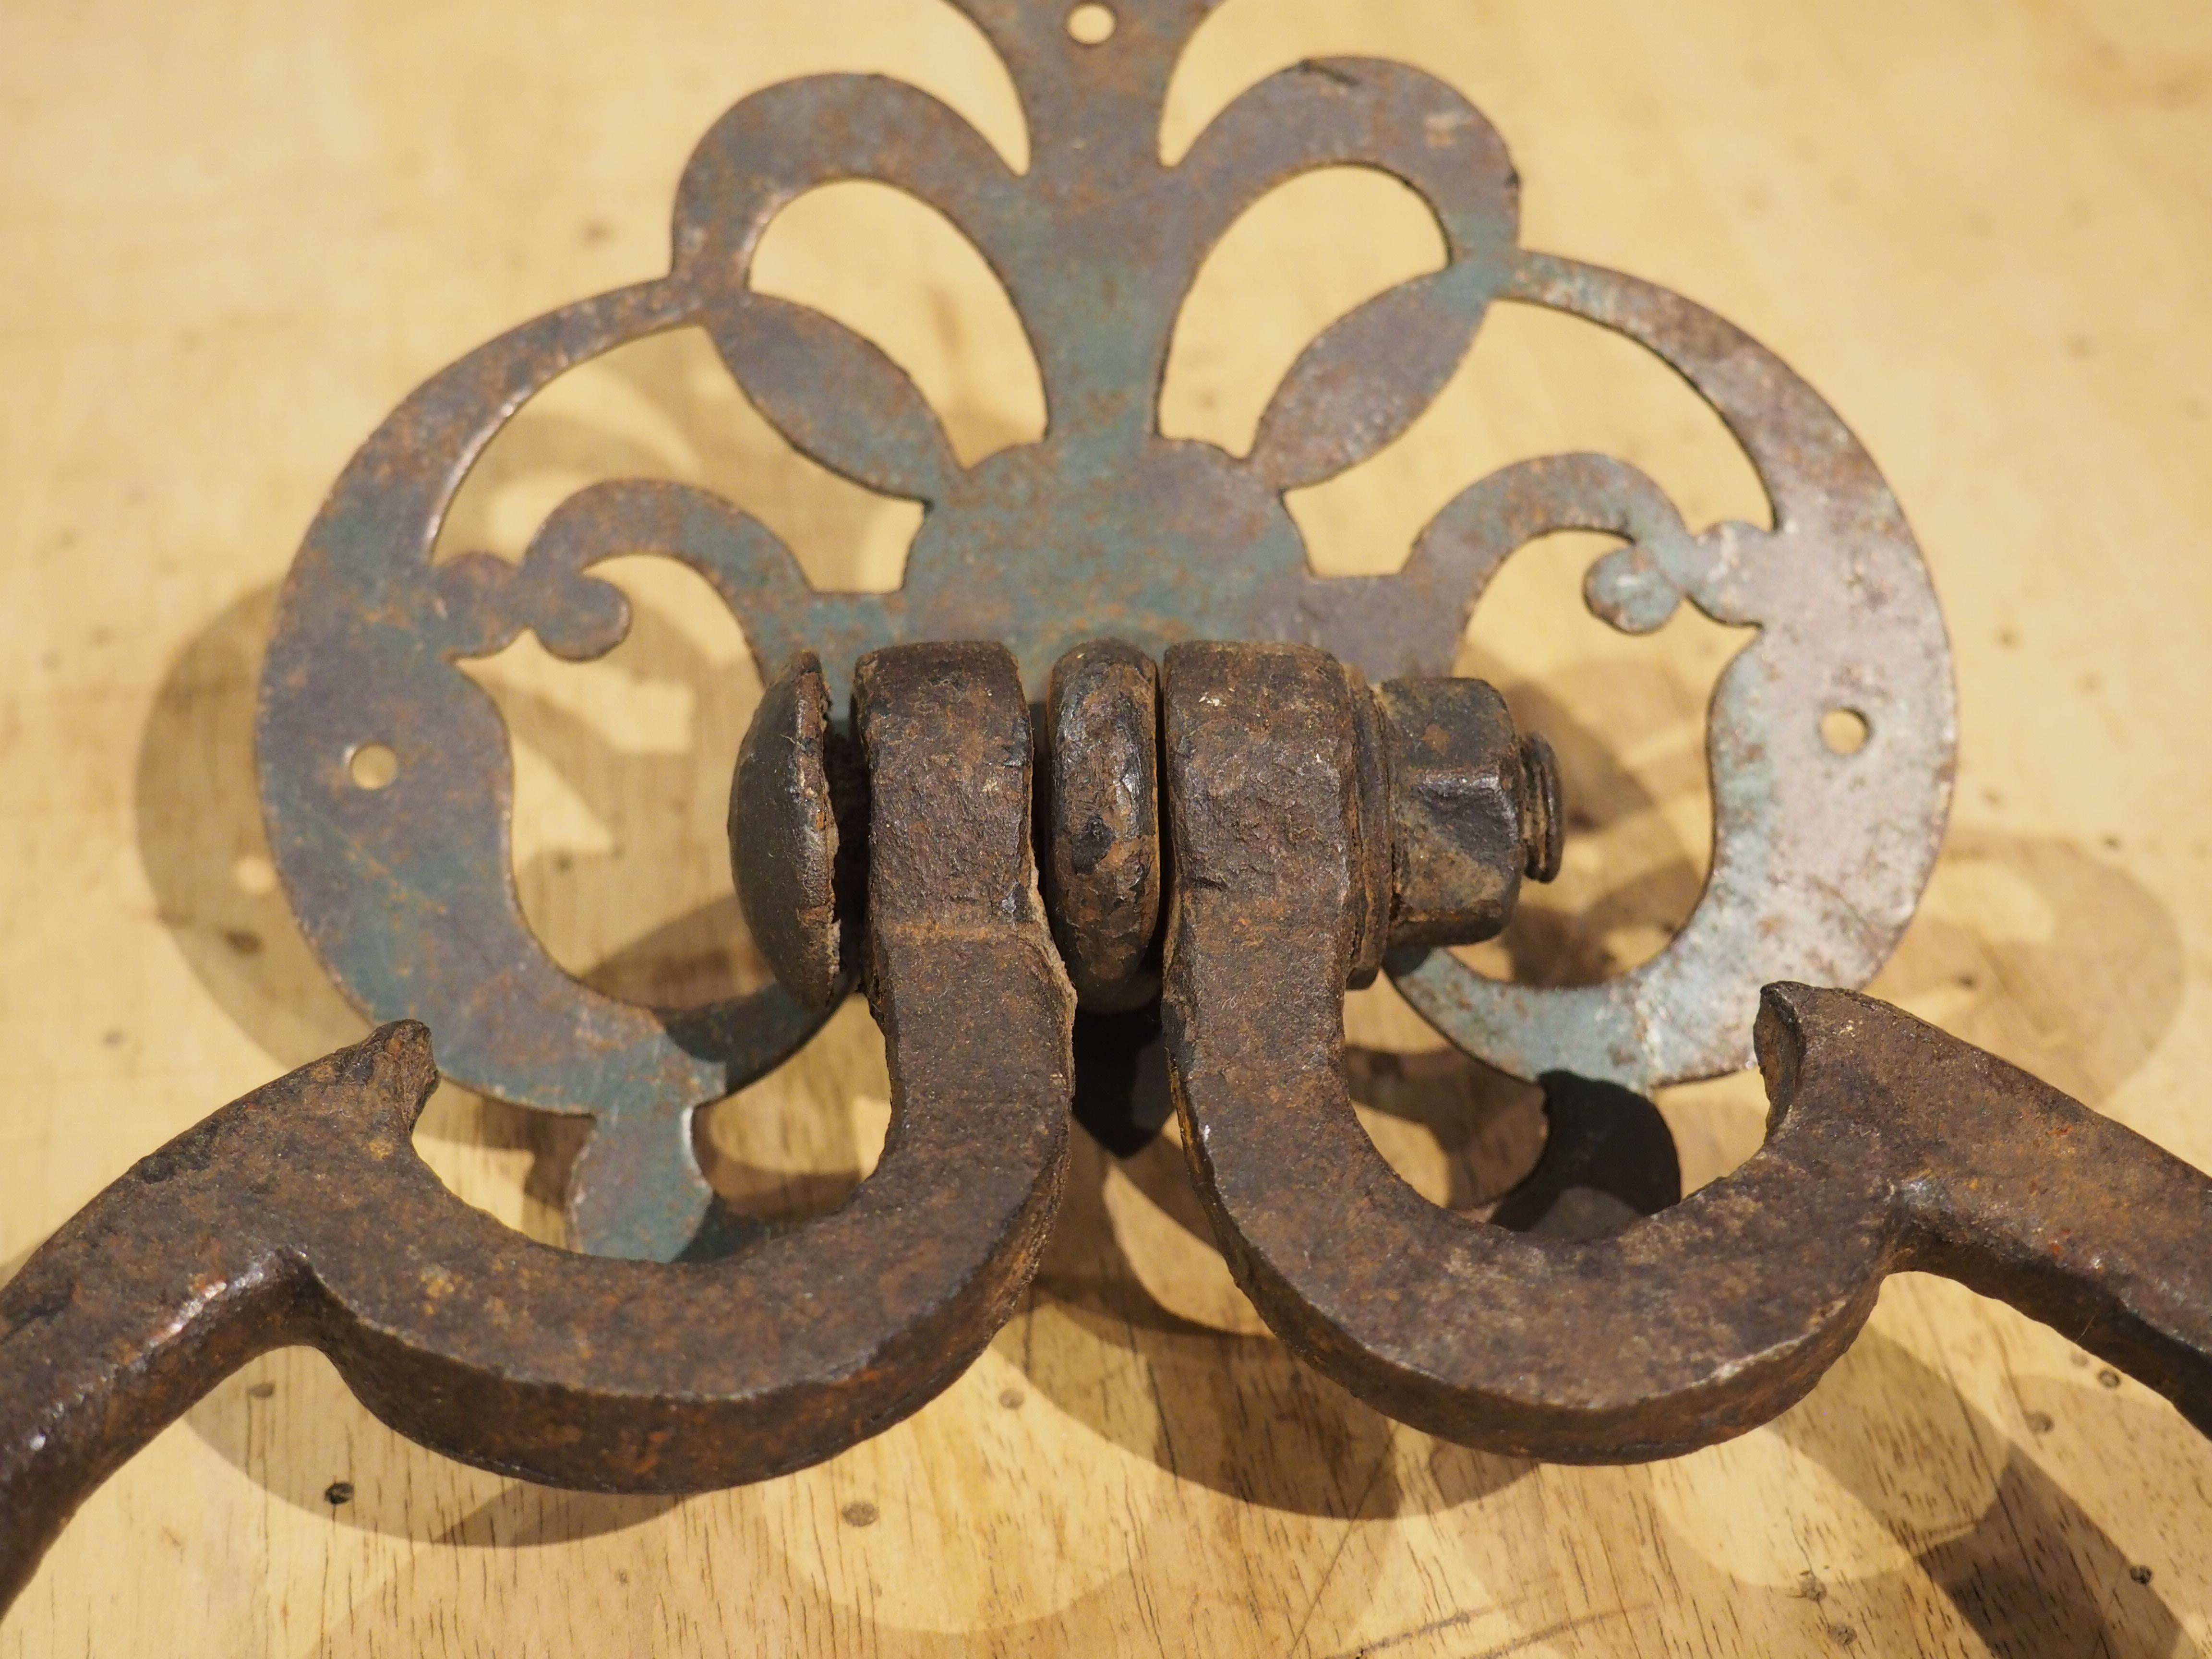 French Antique Wrought Iron Door Knocker from France, 18th Century